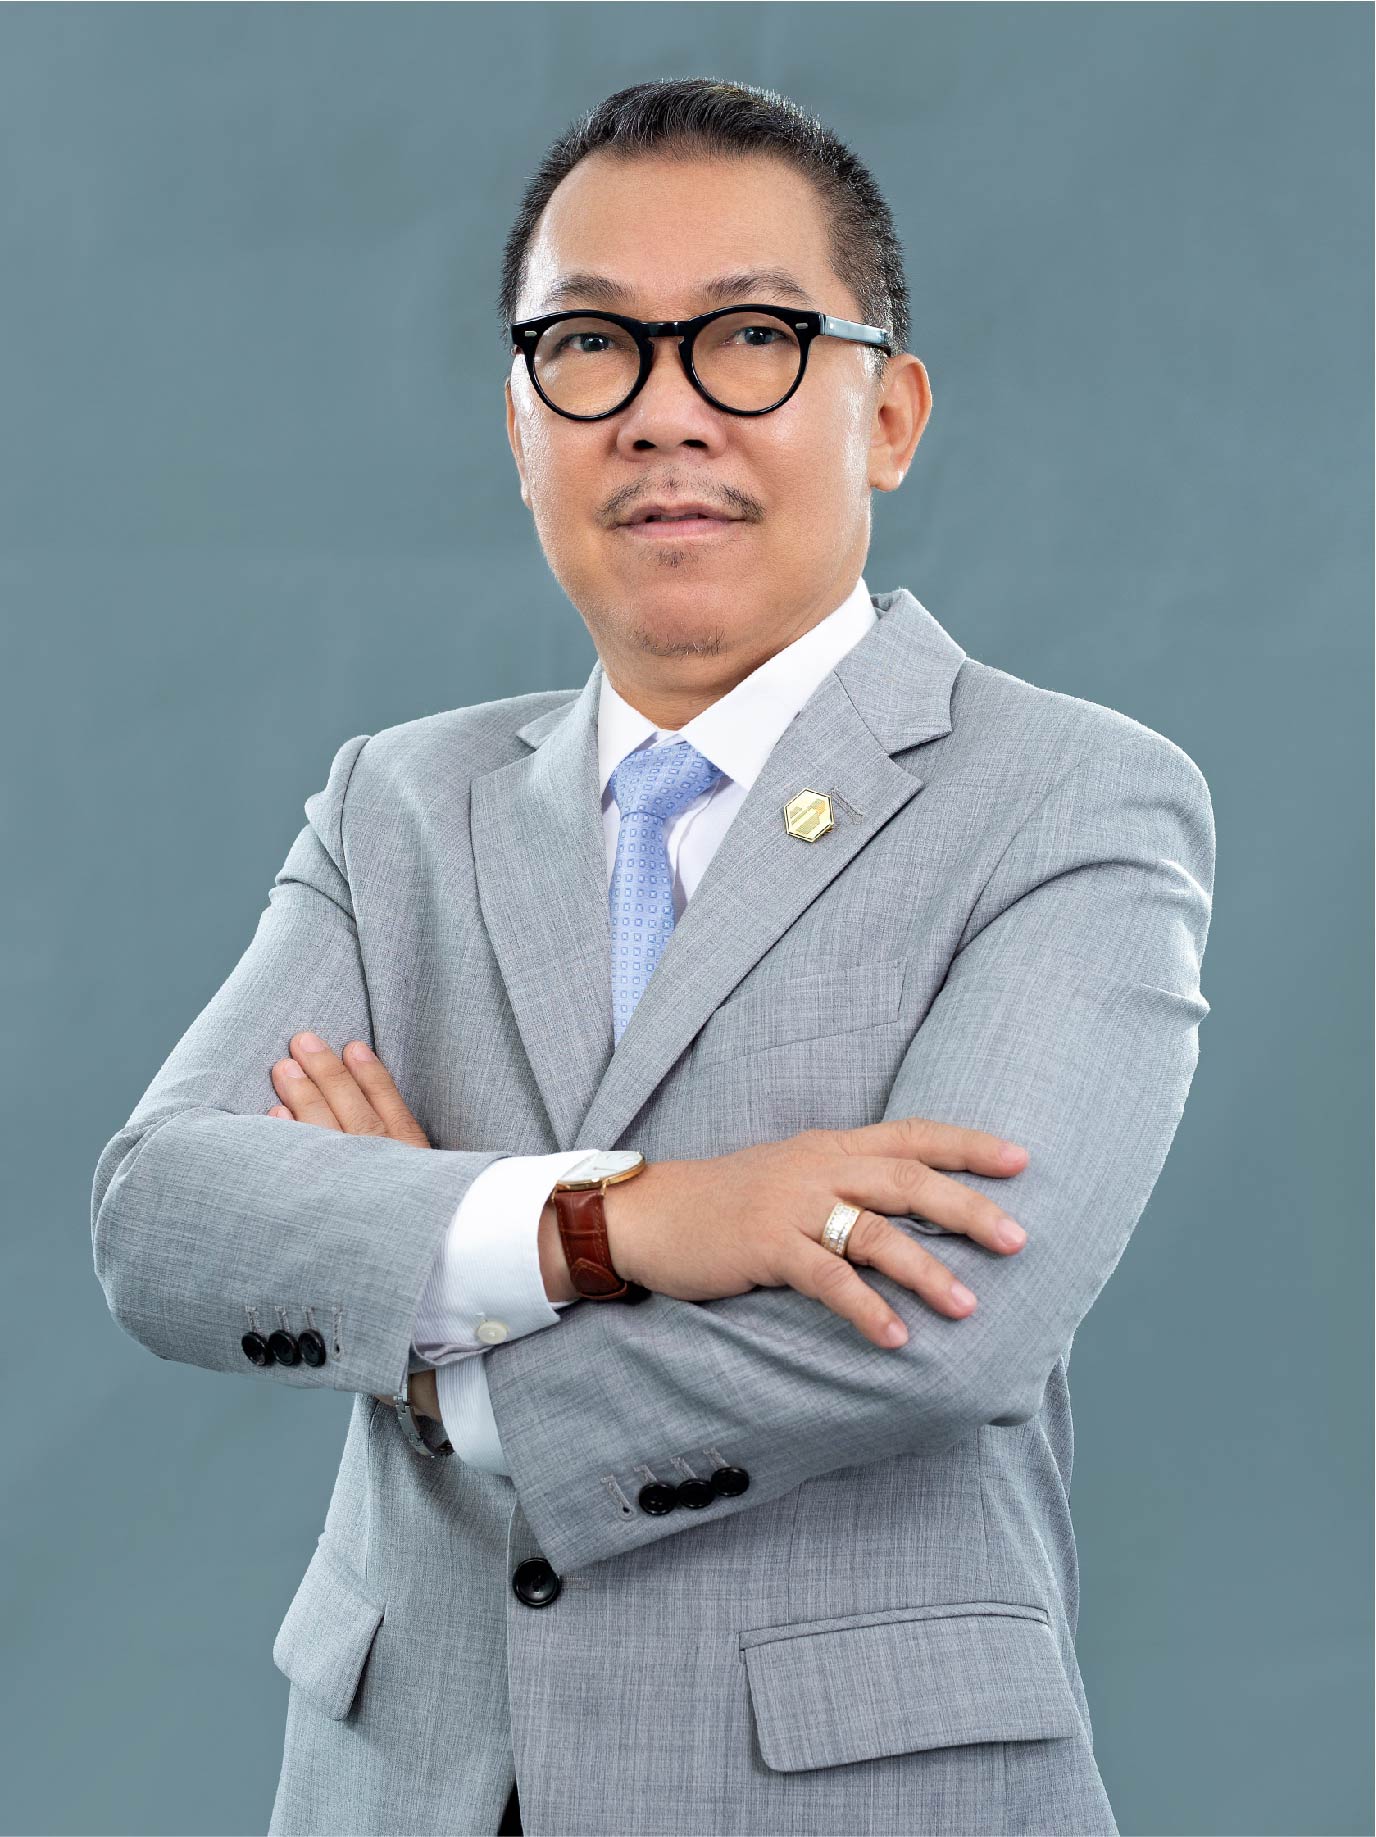 Mr. <strong>Lam Minh Chau</strong>